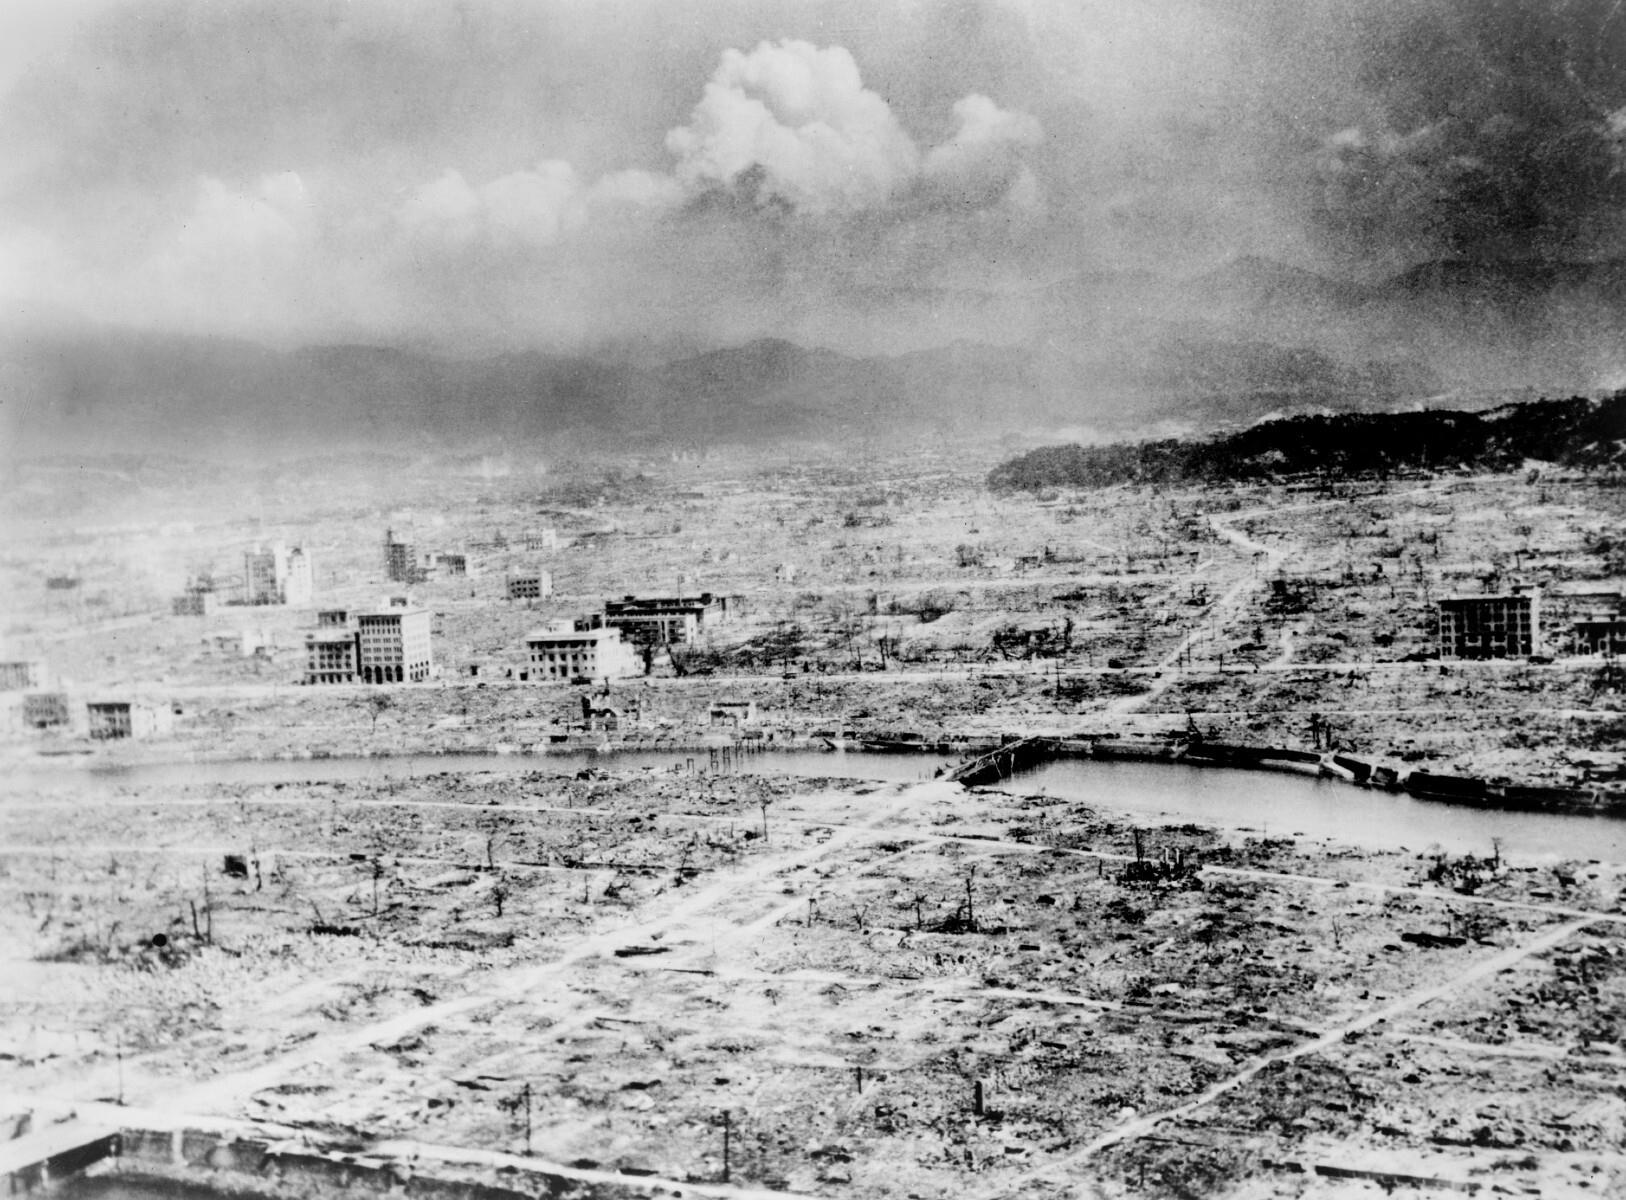 <p>The secret program with the most devastating consequences was the Manhattan Project, which led to the atomic bomb. German scientists were already working on nuclear theory in the 1930s. The Allies developed their own bomb in great secrecy. Workers who talked about the project faced 10-year prison sentences. The first bomb was dropped on Hiroshima in August 1945, killing over 70,000 people. After a second bomb was dropped on Nagasaki, Japan surrendered. Before August 1945, only a few dozen people knew of the bomb’s catastrophic potential.</p>